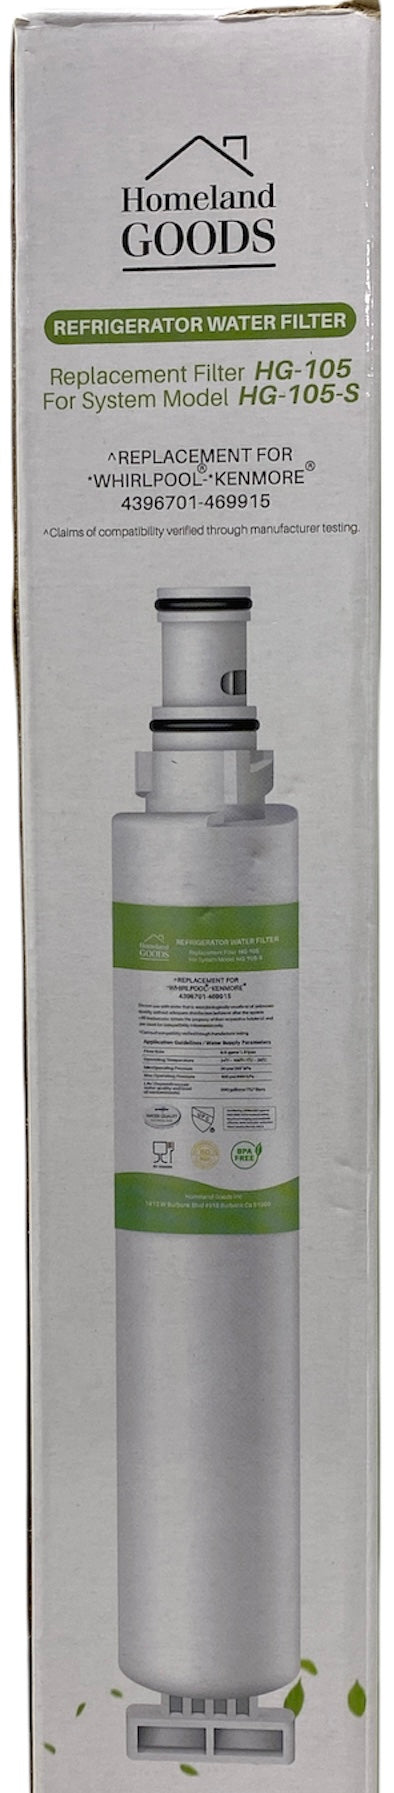 RWF2000A Refrigerator Water Filter IAPMO Certified Replacement for Kenmore 9915, 4396701, 469915, Whirlpool EDR6D1, WF293, RWF2000A, LC200V, SGF-W10, L200V, RWF1021, Filter 6, WFL200, 4396702, EFF-6001A, Refrigerator Water Filter